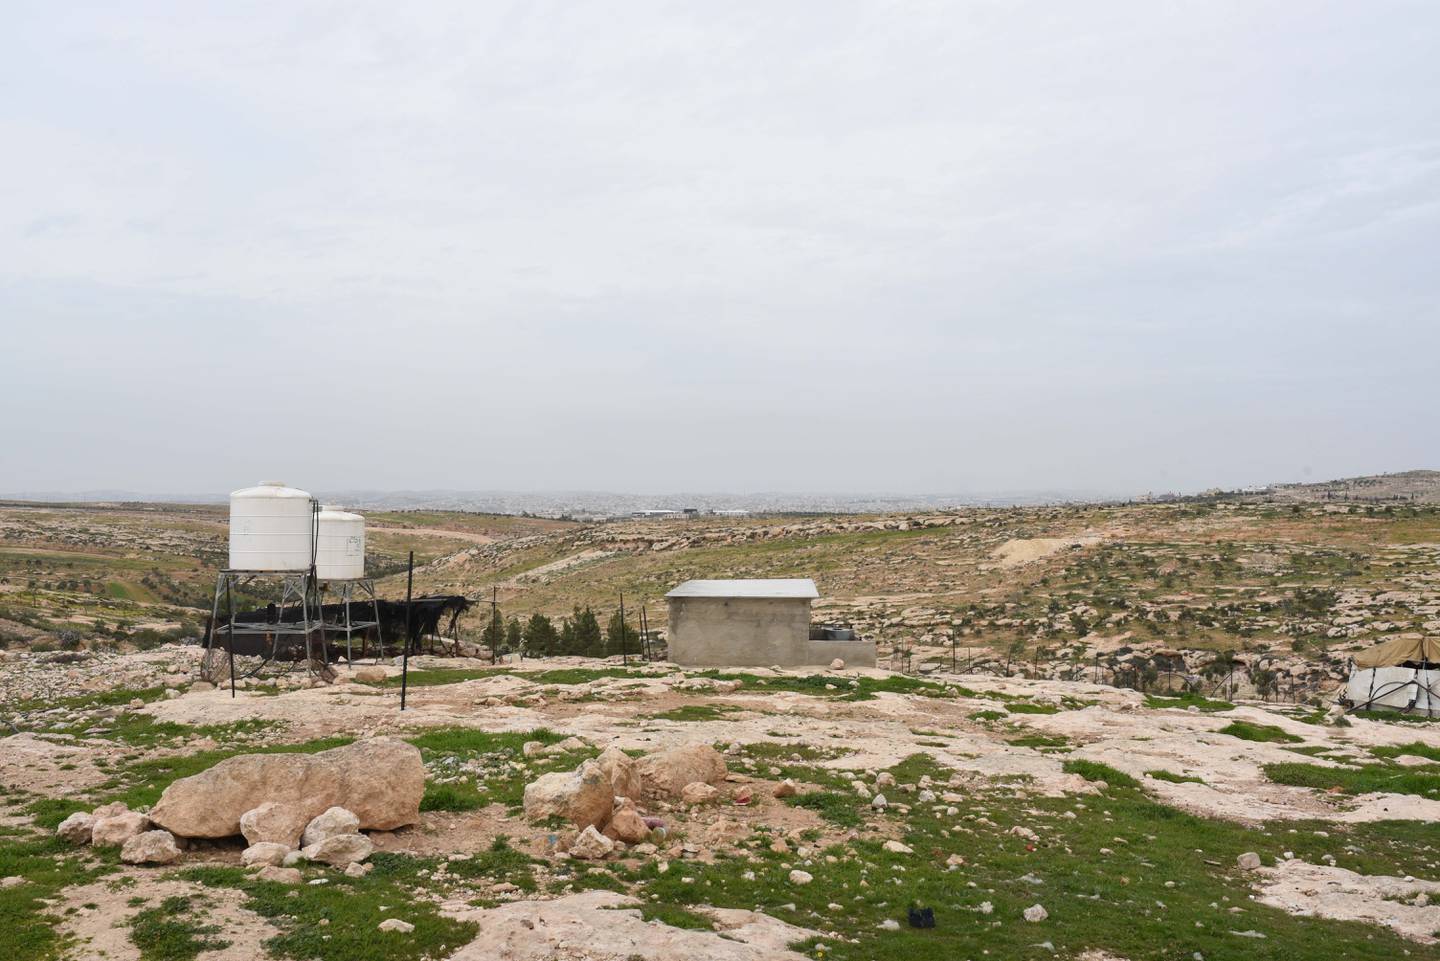 The view across the southern West Bank from Shib Al Butum, a Palestinian village. Rosie Scammell / The National